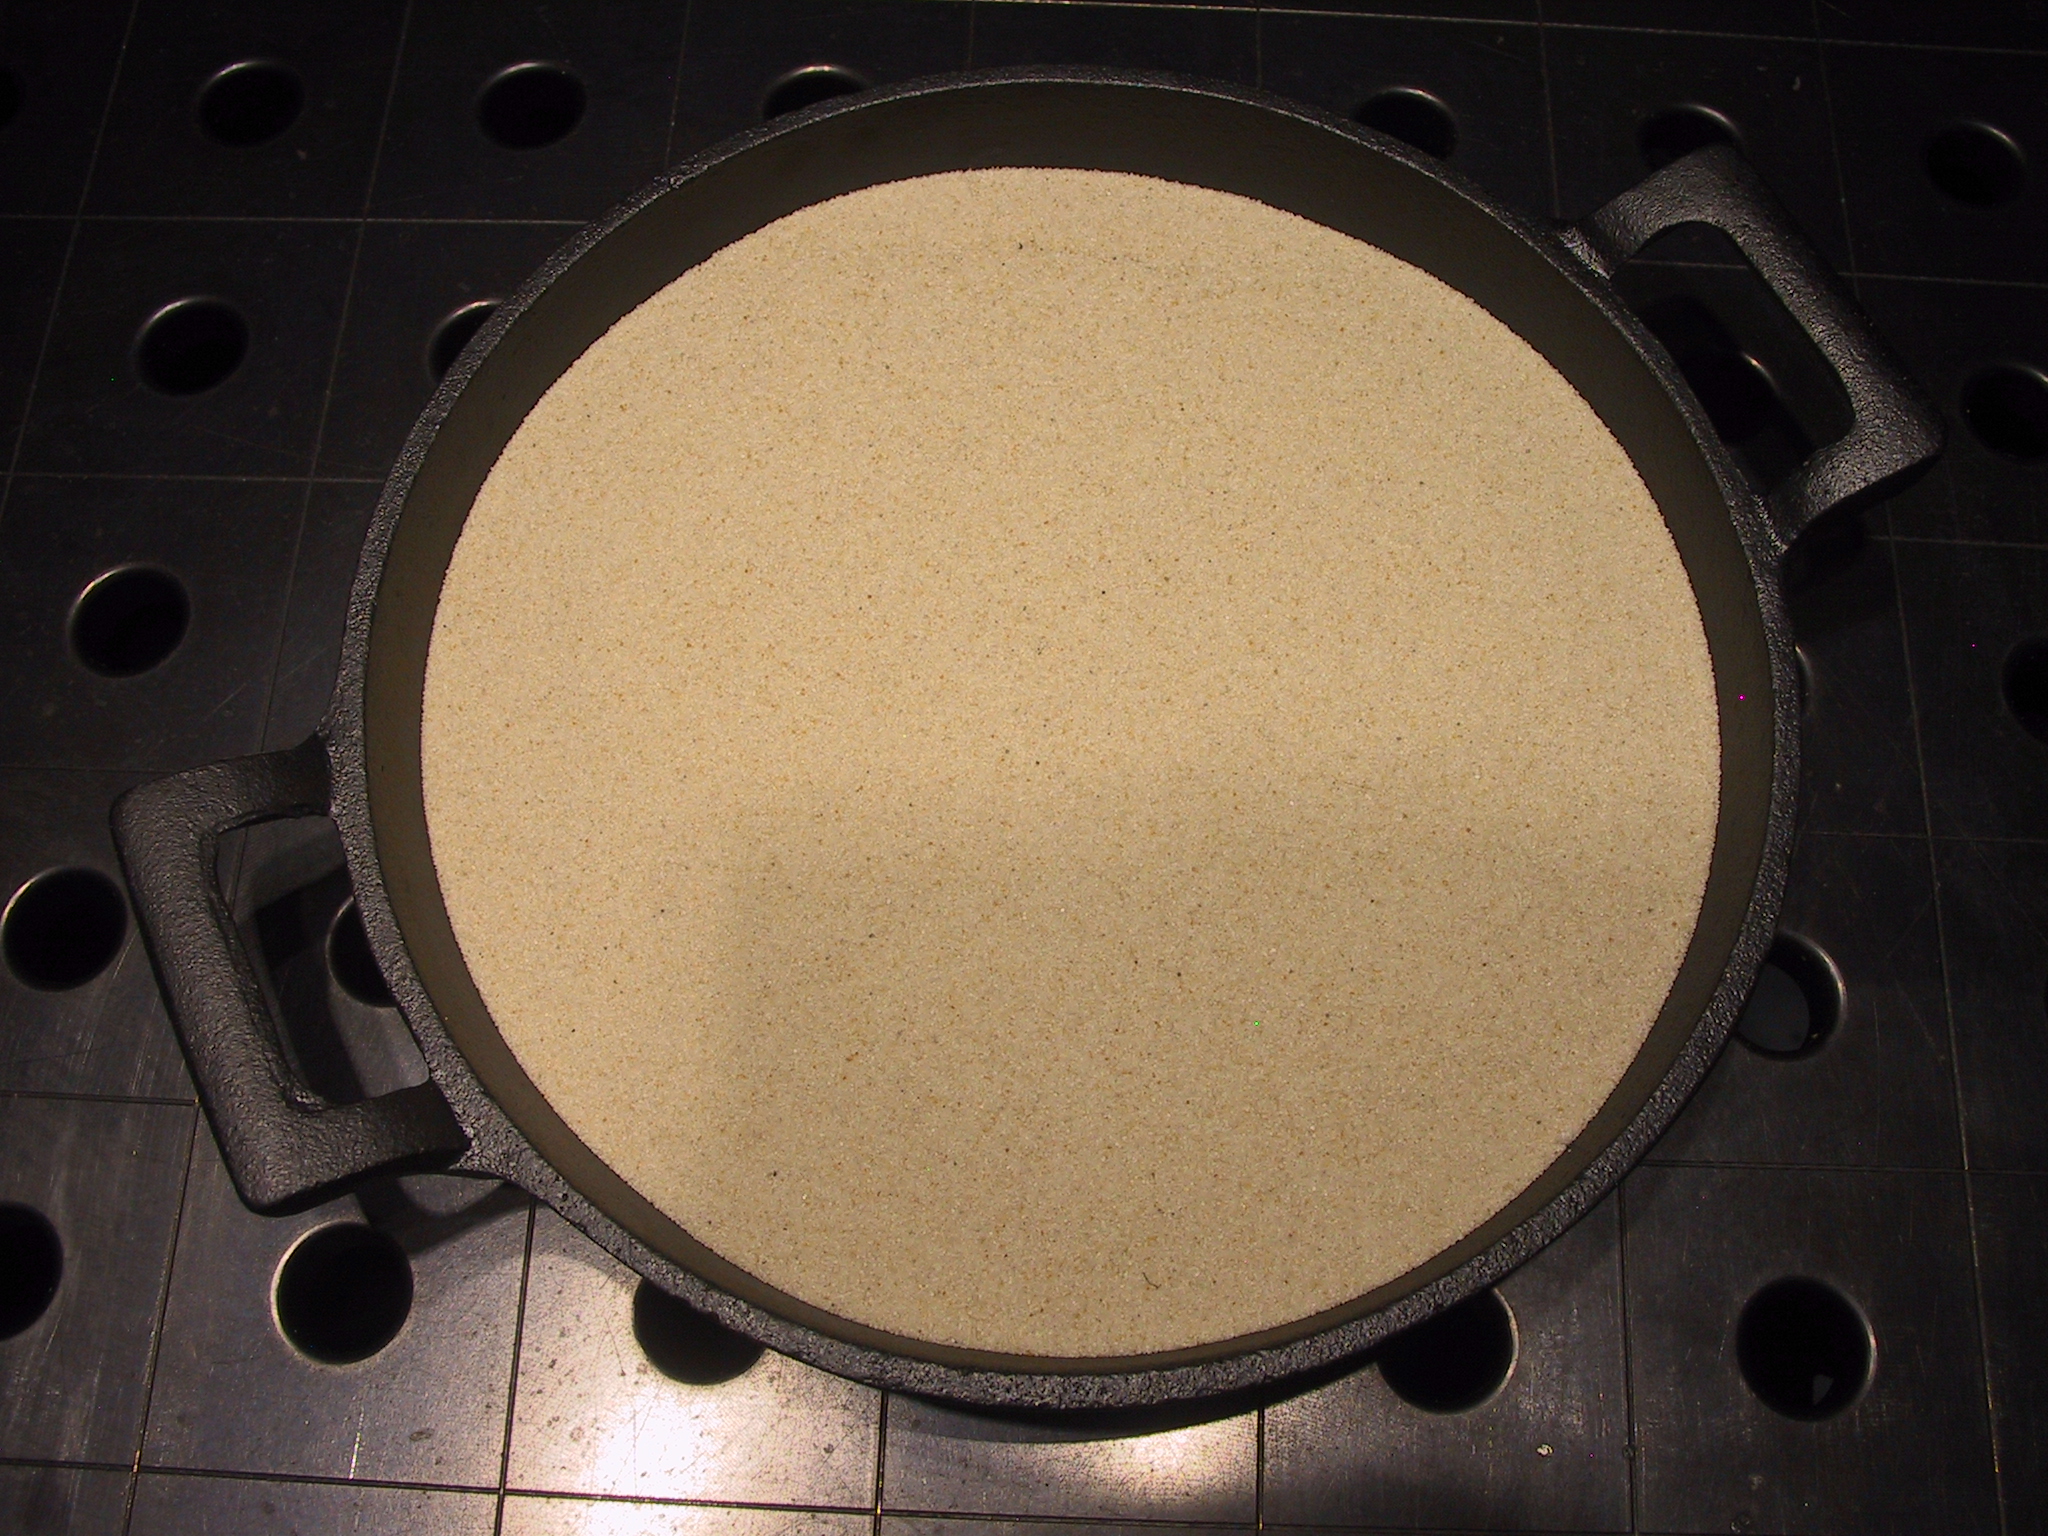 Hotplate with Sand Bath Attachment